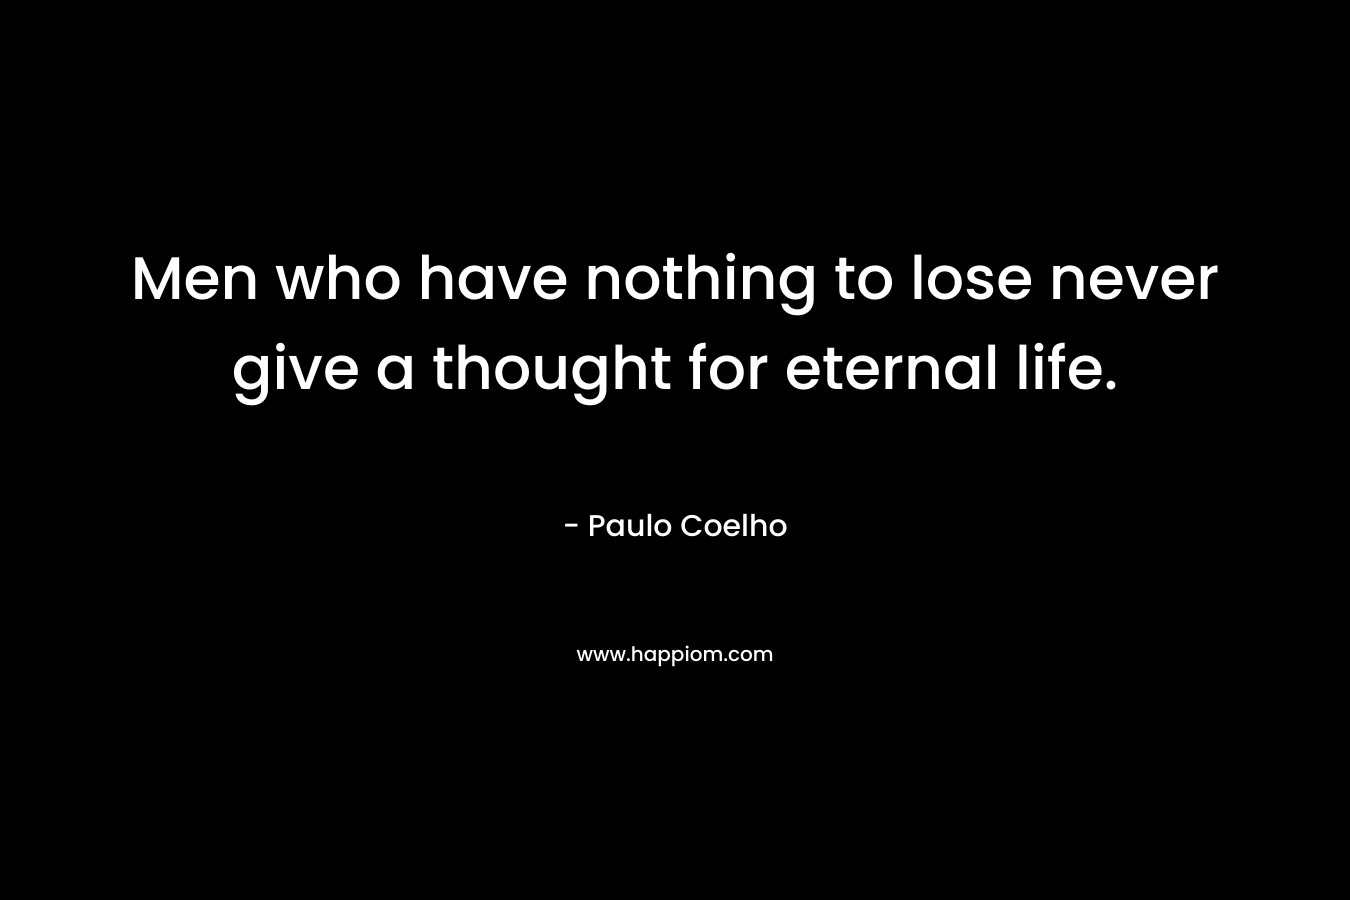 Men who have nothing to lose never give a thought for eternal life.